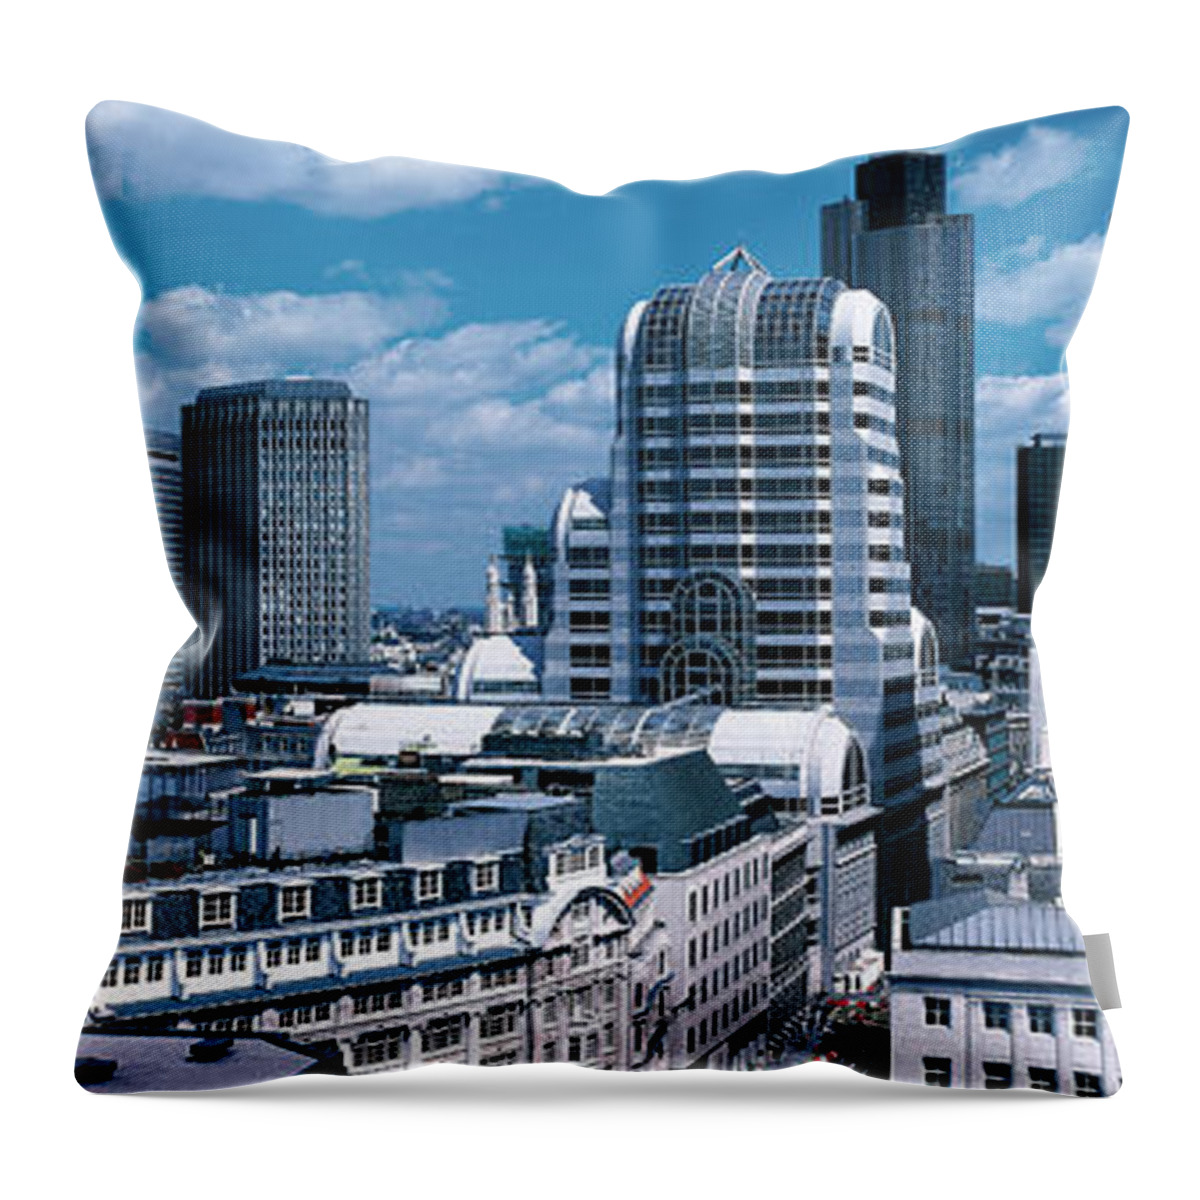 Photography Throw Pillow featuring the photograph London England by Panoramic Images